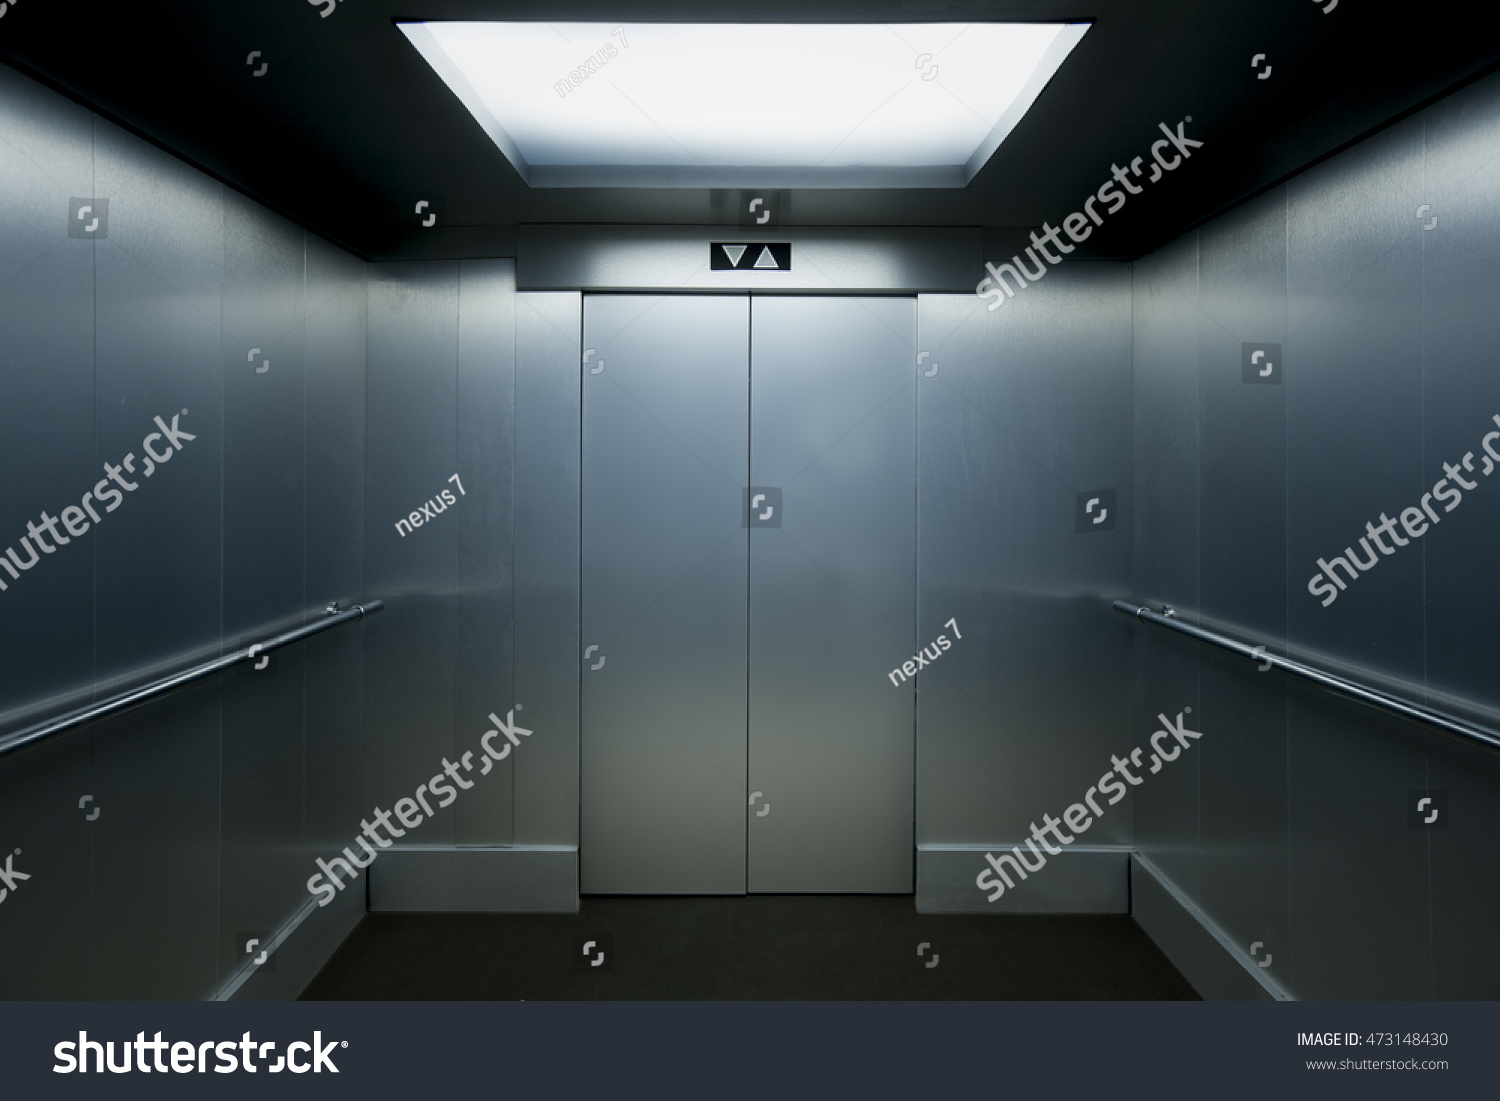 Interior view of a modern elevator with metallic walls. #473148430